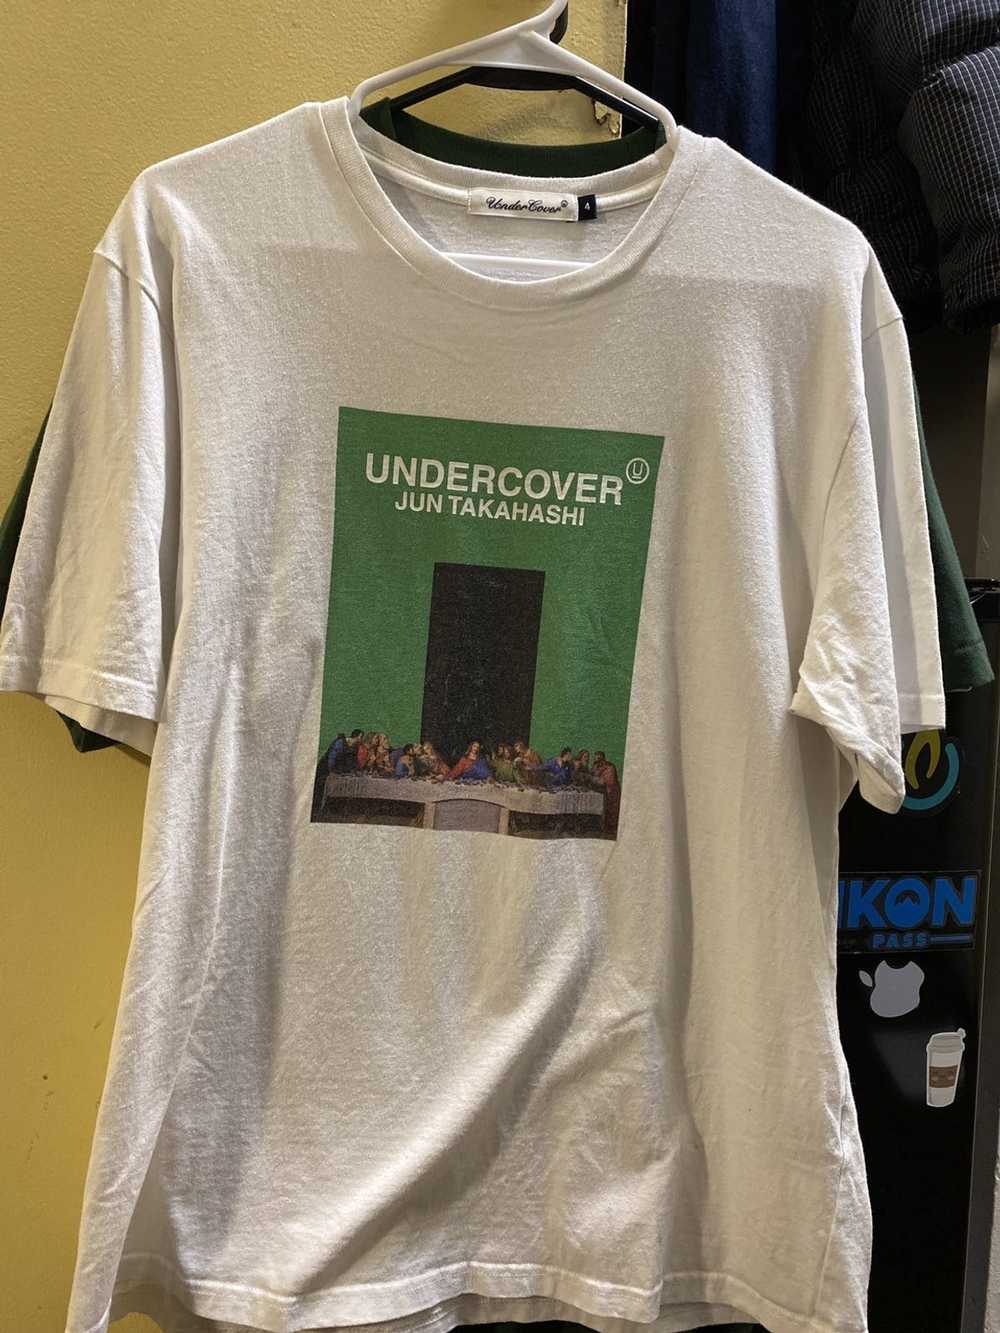 Undercover Last Supper Print Tee - image 1